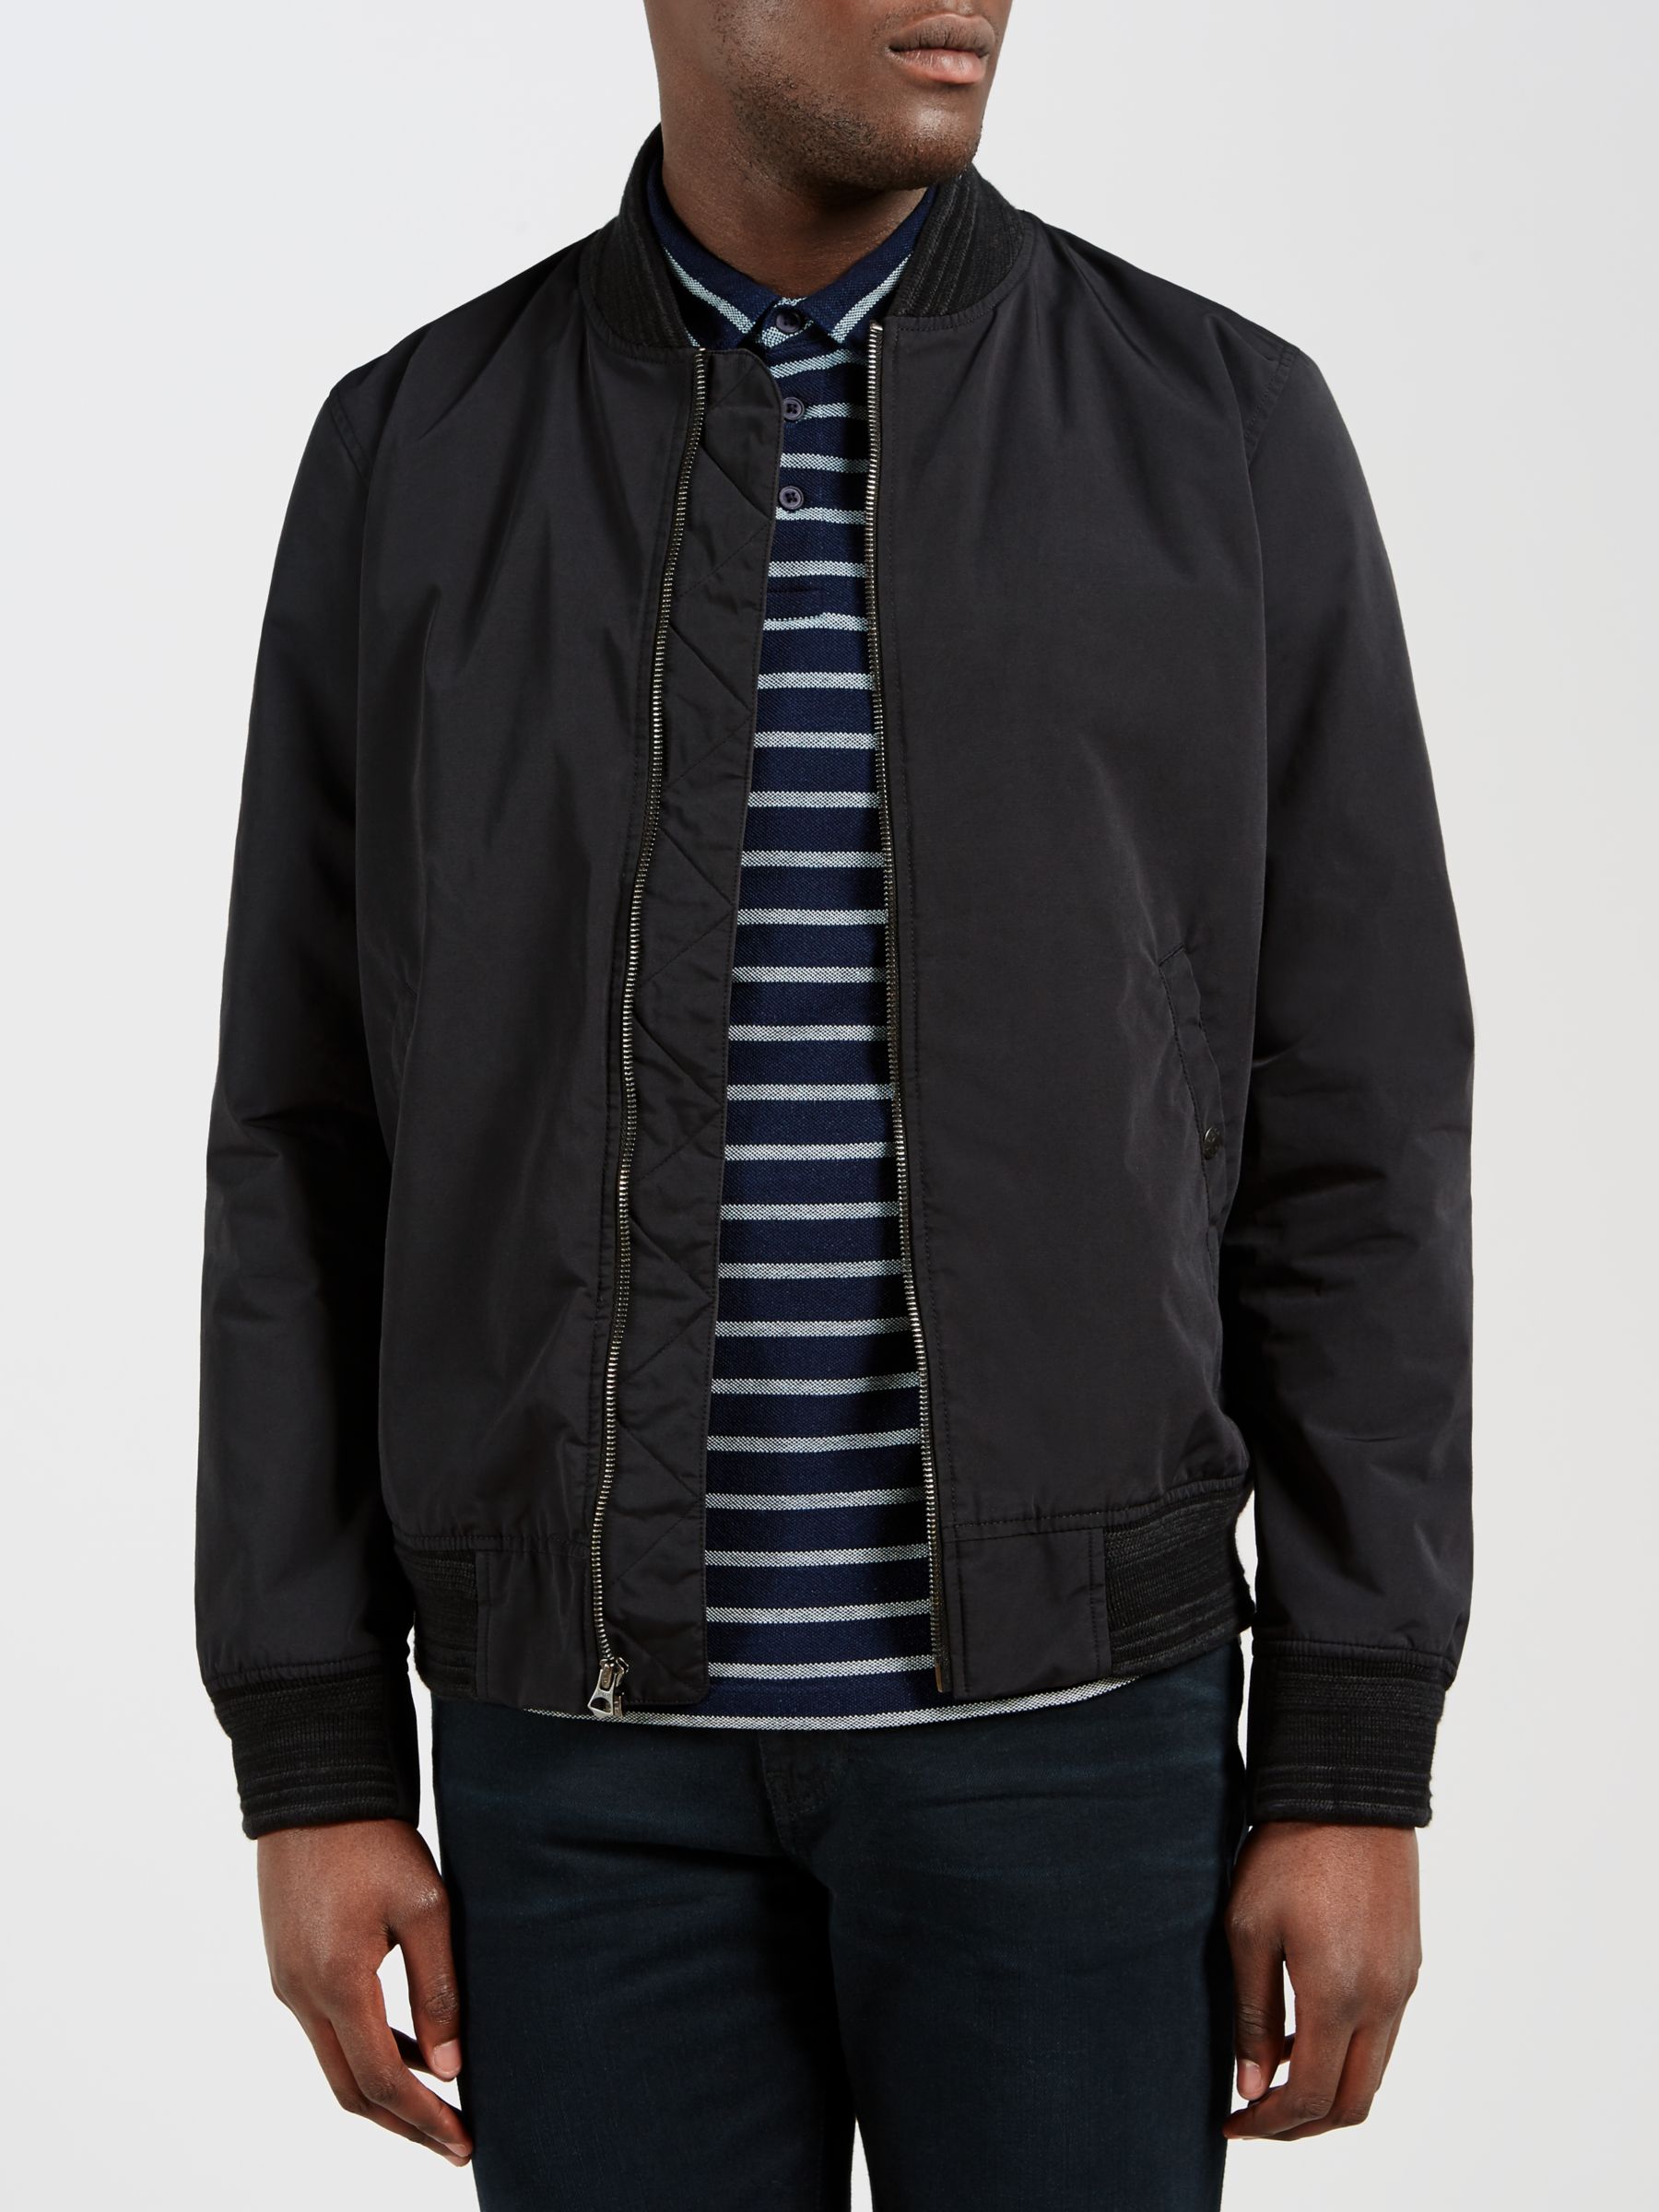 Levis Thermore Bomber Jacket Best Sale